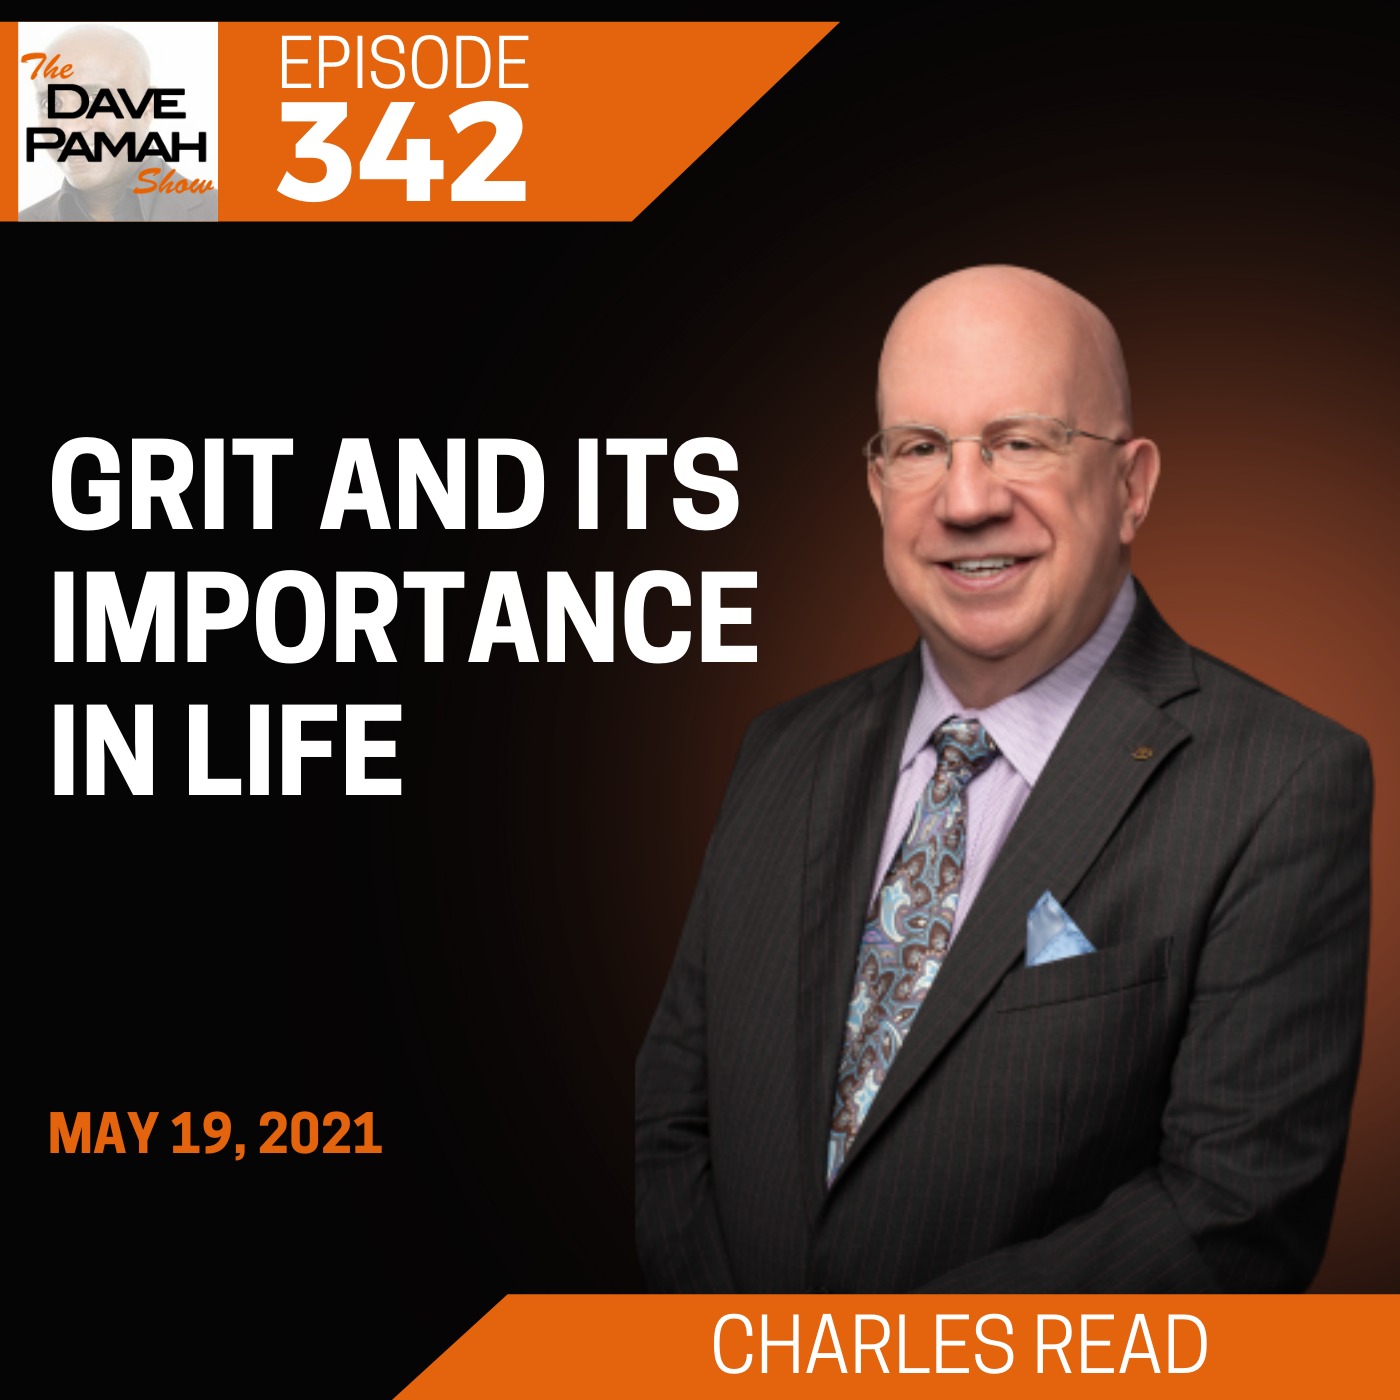 Grit and its importance in life with Charles Read